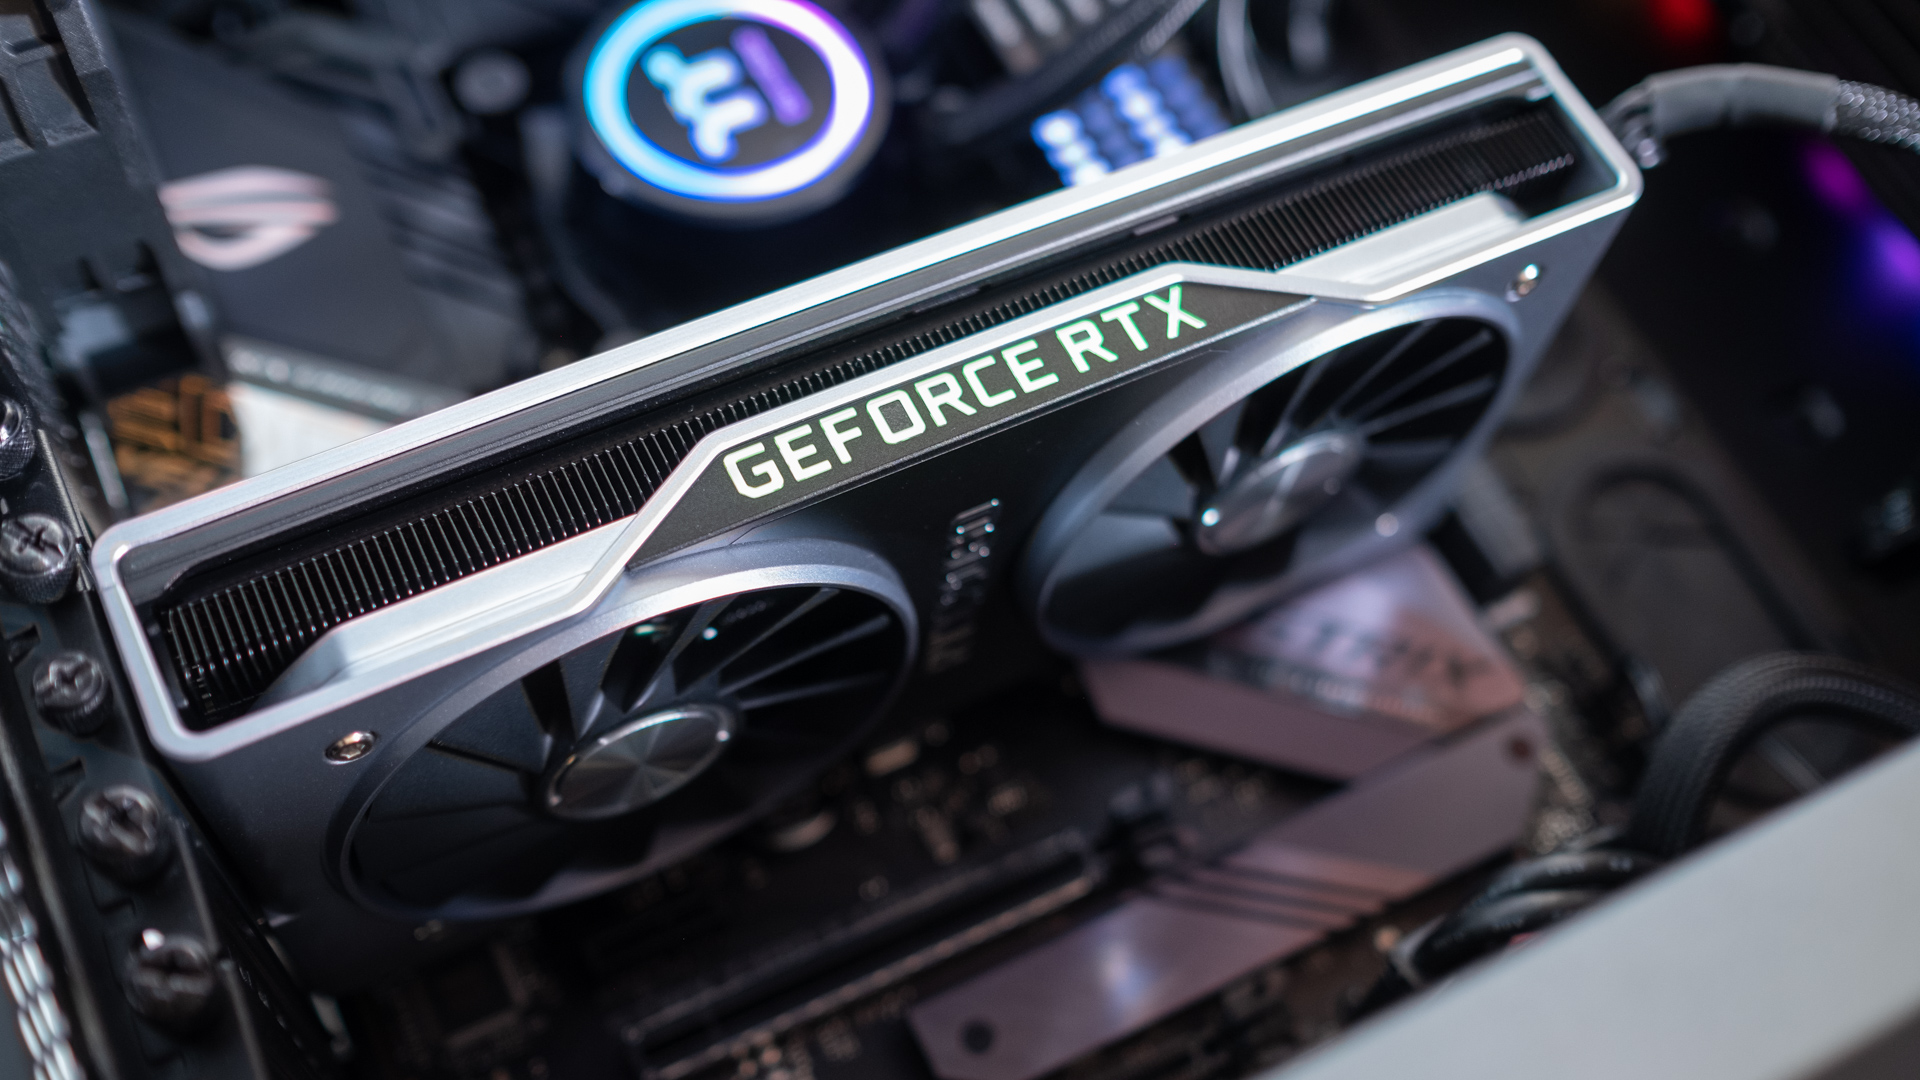 Nvidia Rtx 4090 Could Be The First Lovelace Gpu To Launch Will The Gamble Pay Off?